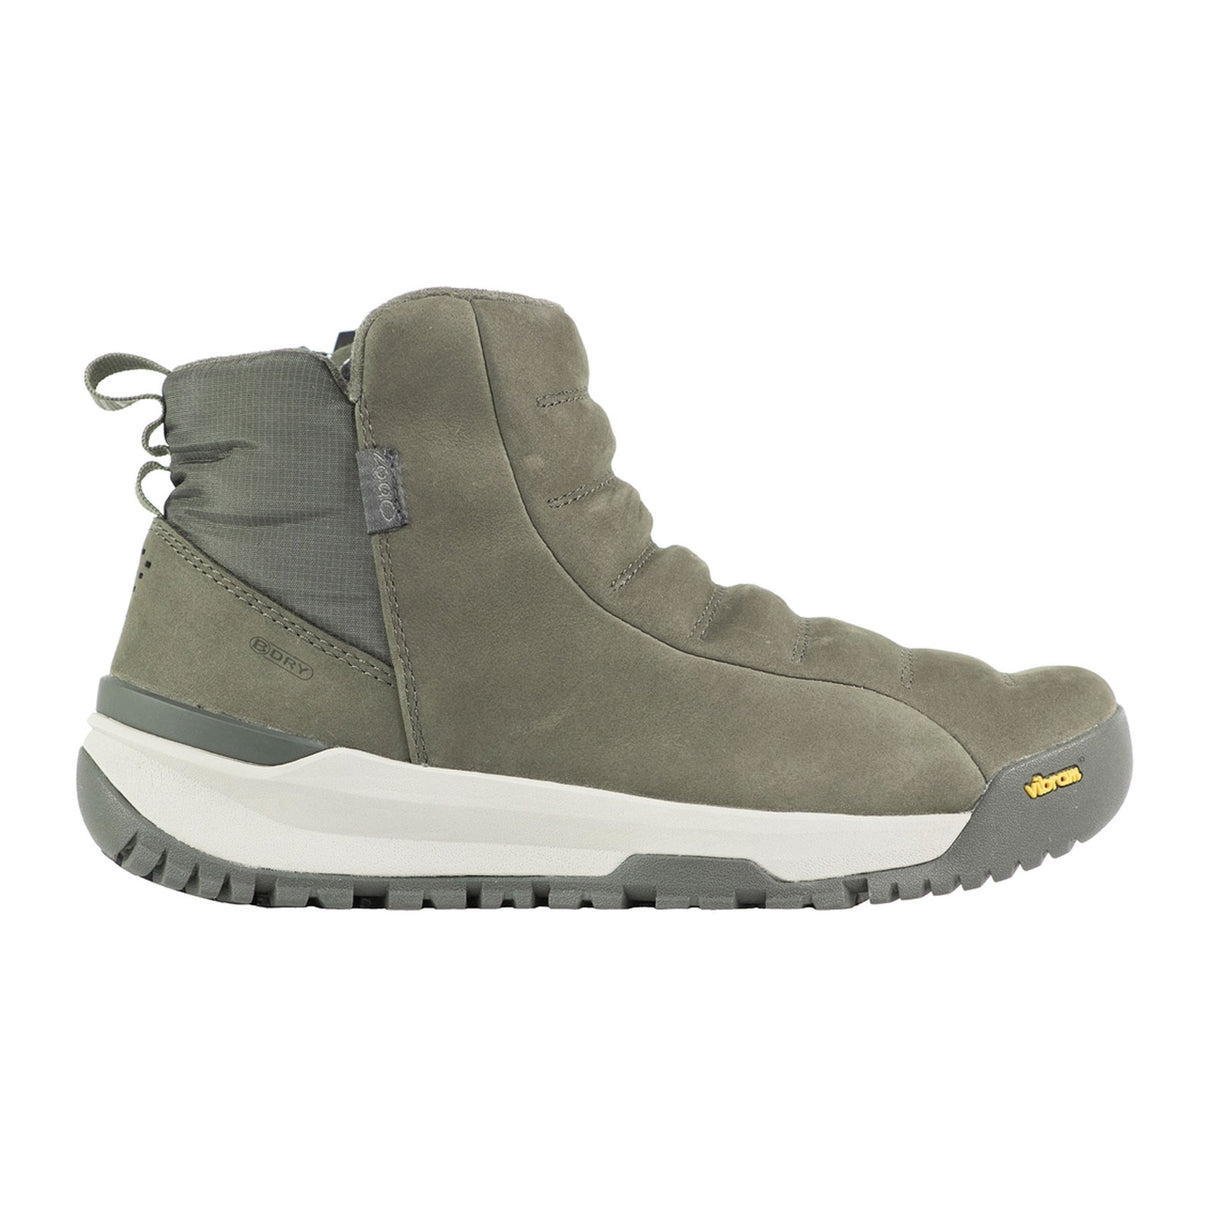 Oboz Sphinx Pull On Insulated B-DRY Winter Boot (Women) - Pinedale Boots - Winter - Ankle Boot - The Heel Shoe Fitters